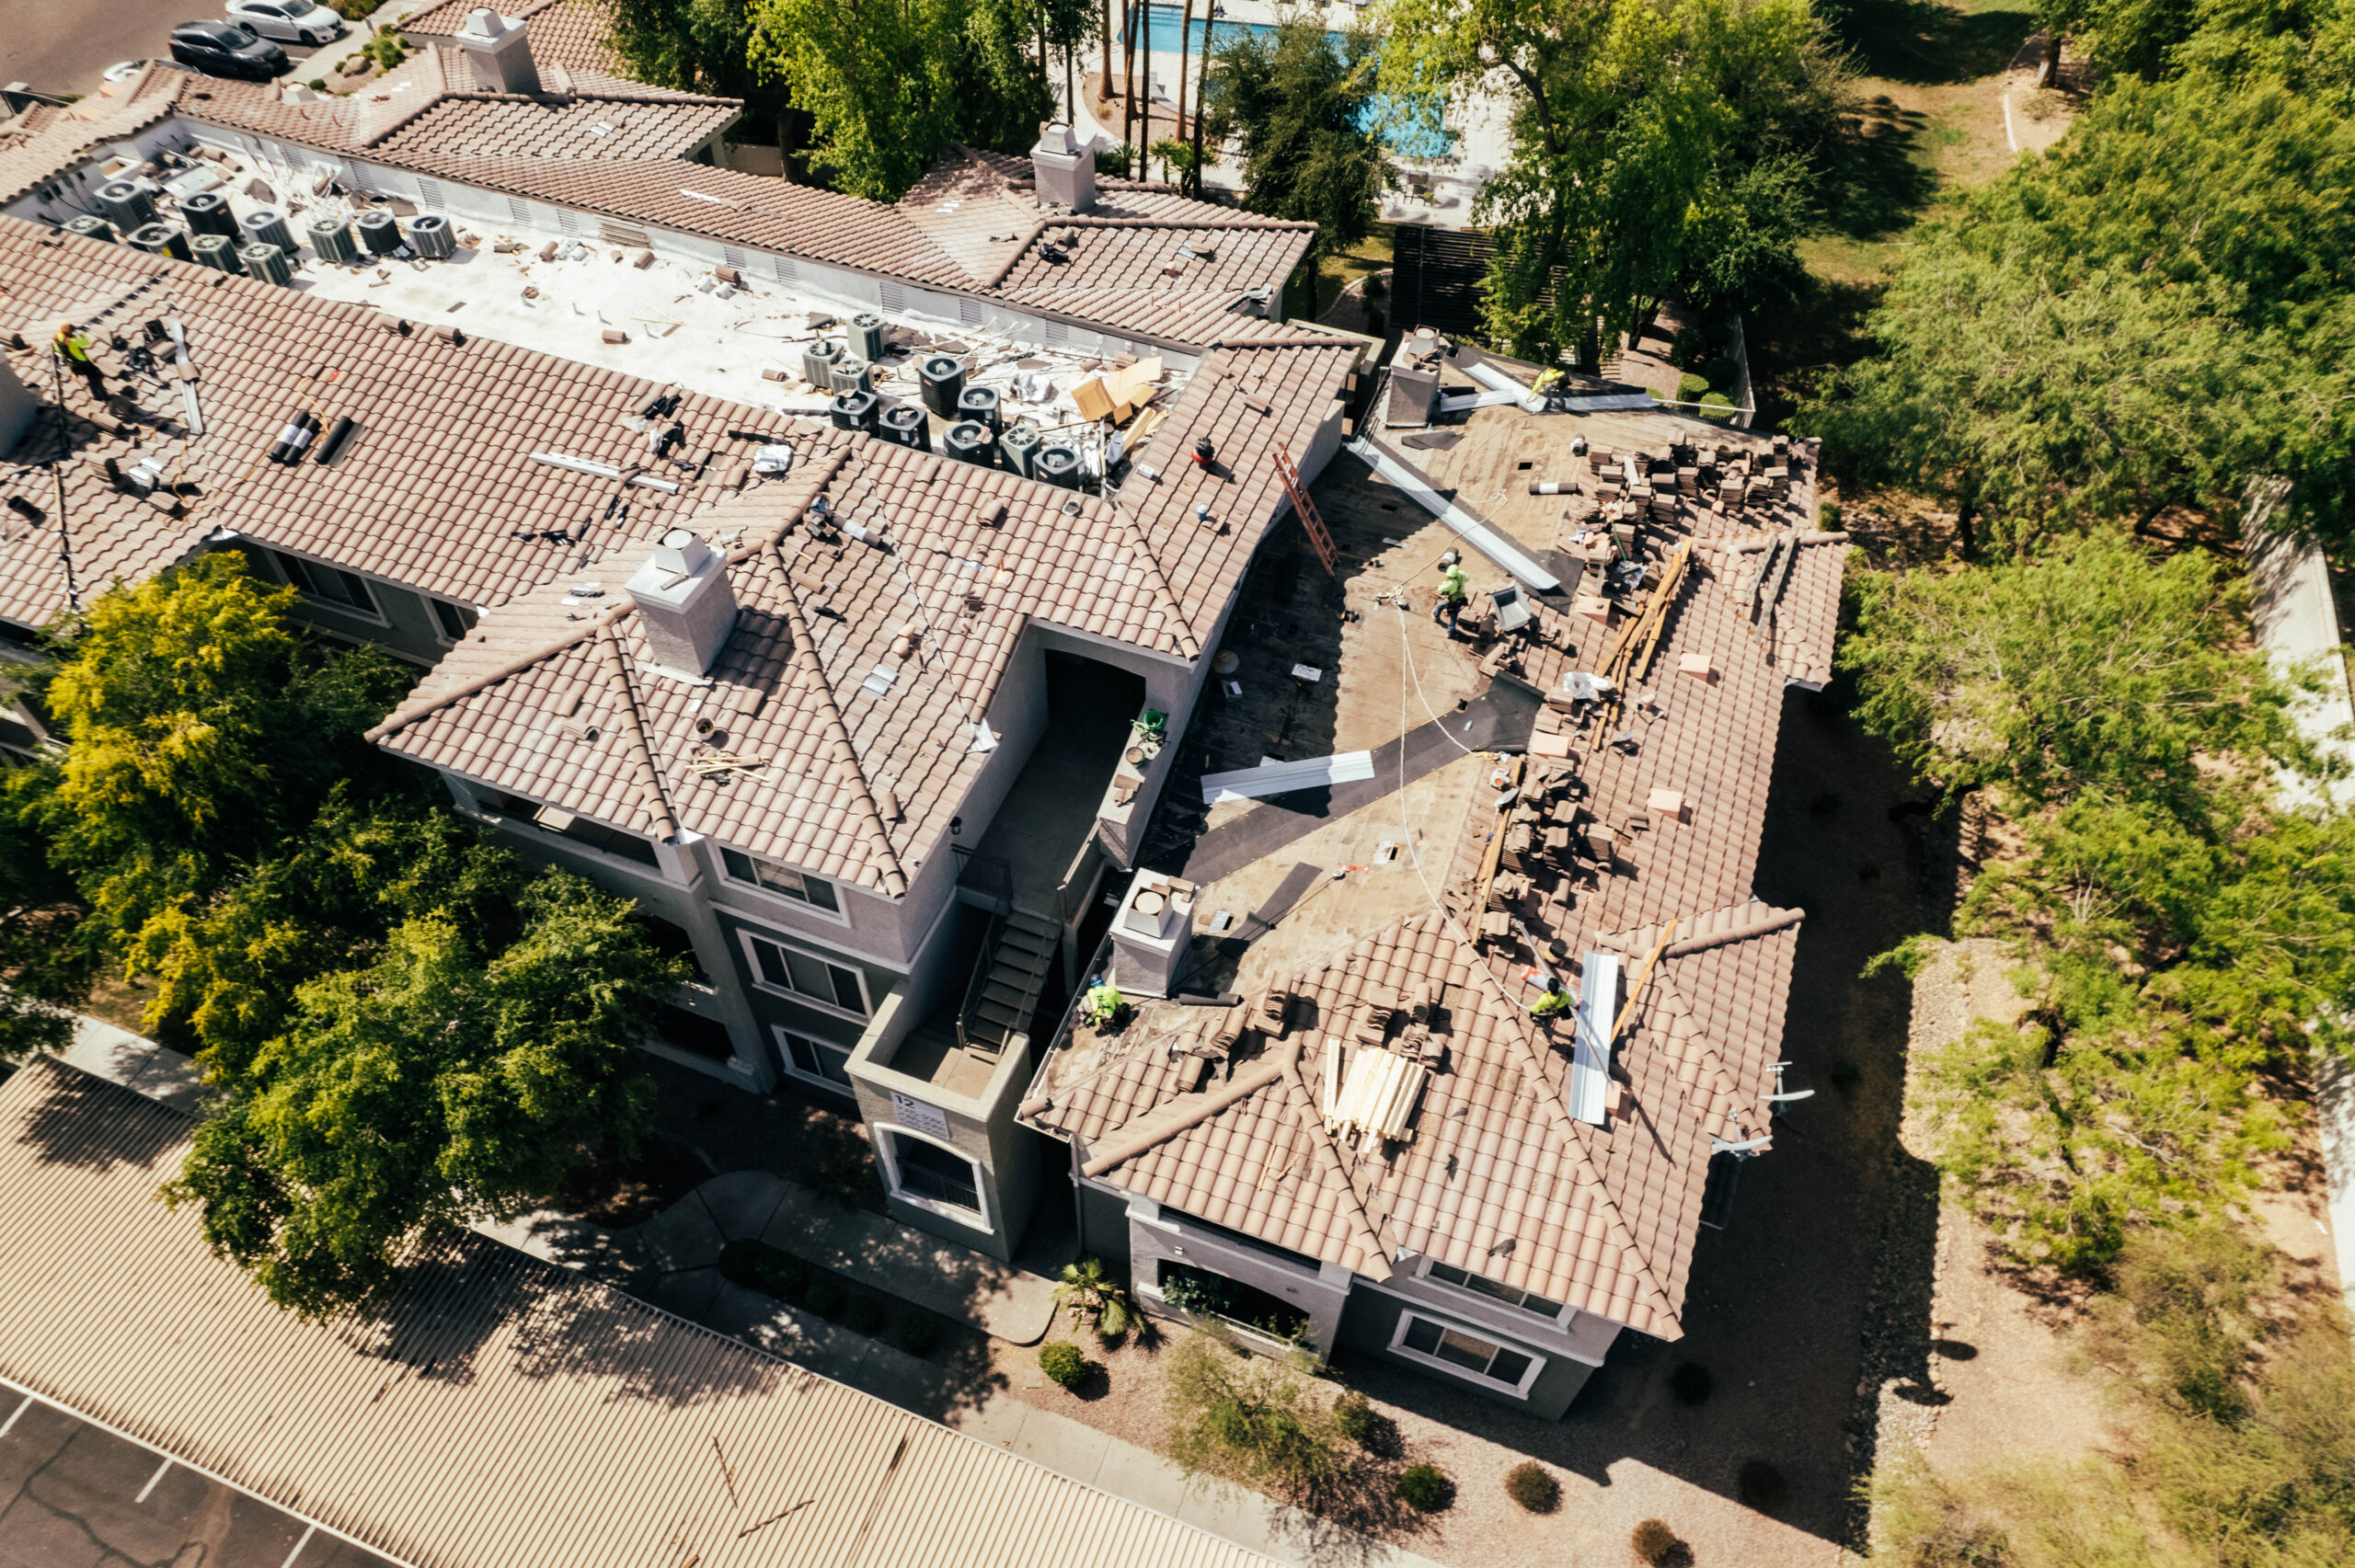 An aerial view of a tile re-roofing project in the Biltmore Area.